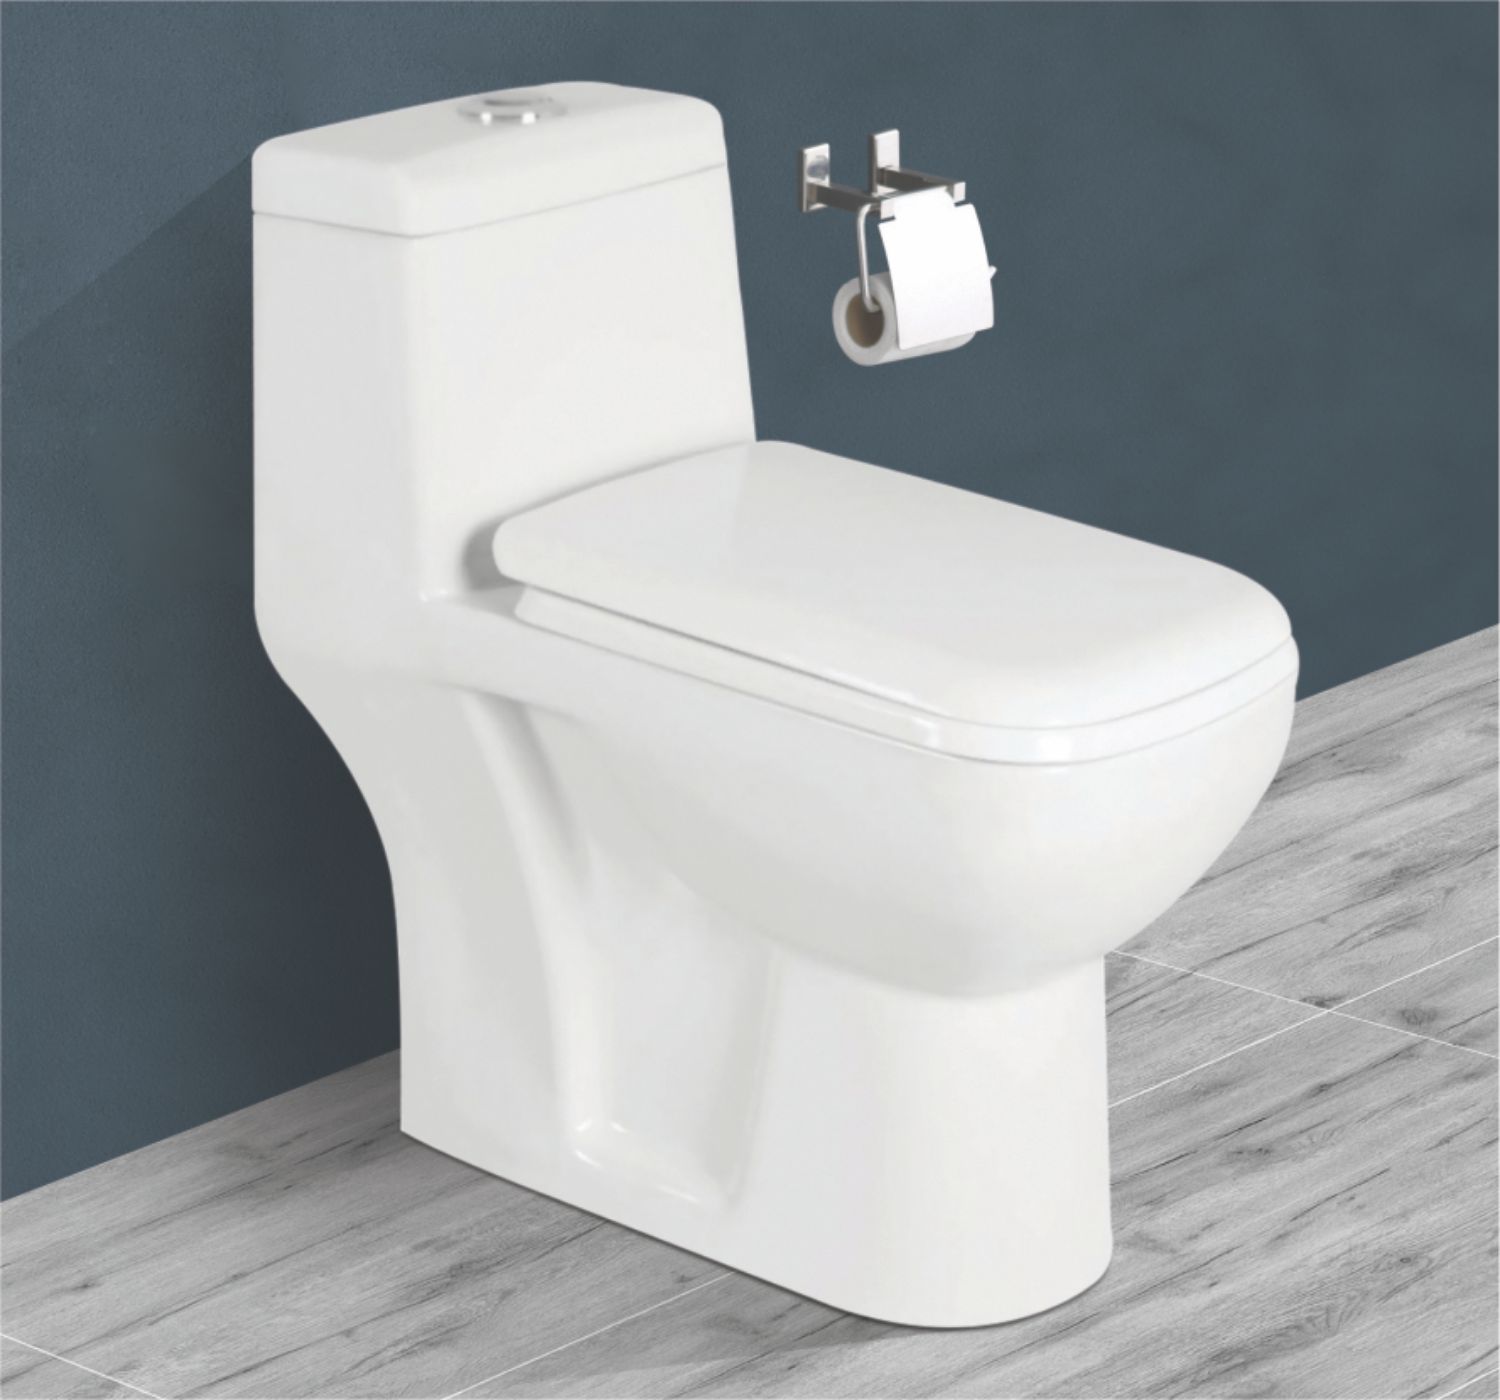 Ceramic One Piece Water Closet Manufacturers and Suppliers